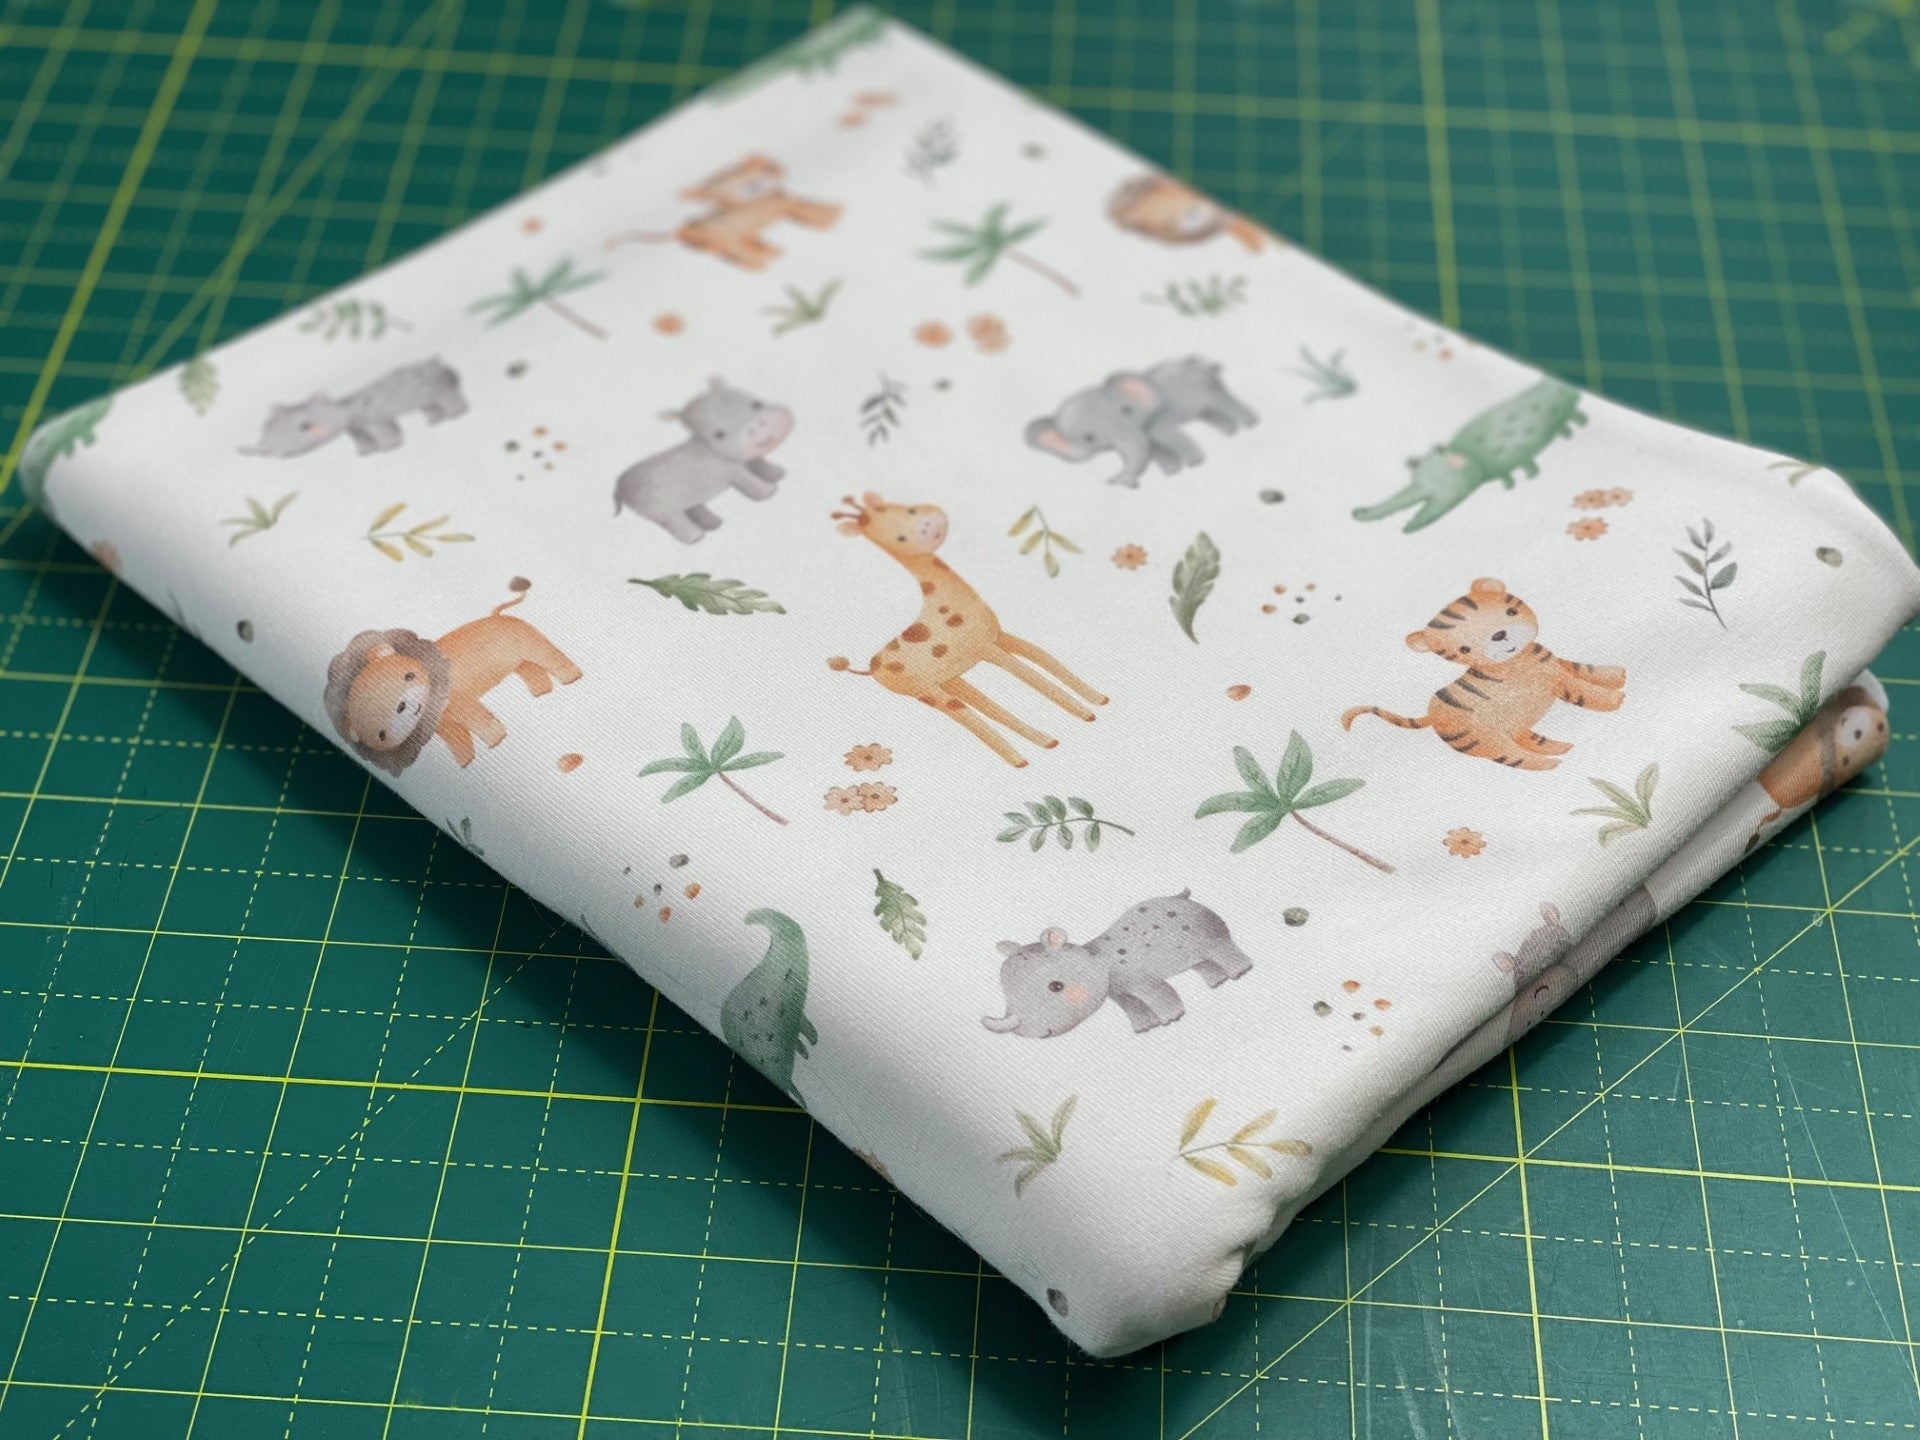 In Stock: Family Fabrics -Autumn River Studio - Safari Animals - 220 gsm Jersey - By the 1/2 yd - Little Rhody Sewing Co.